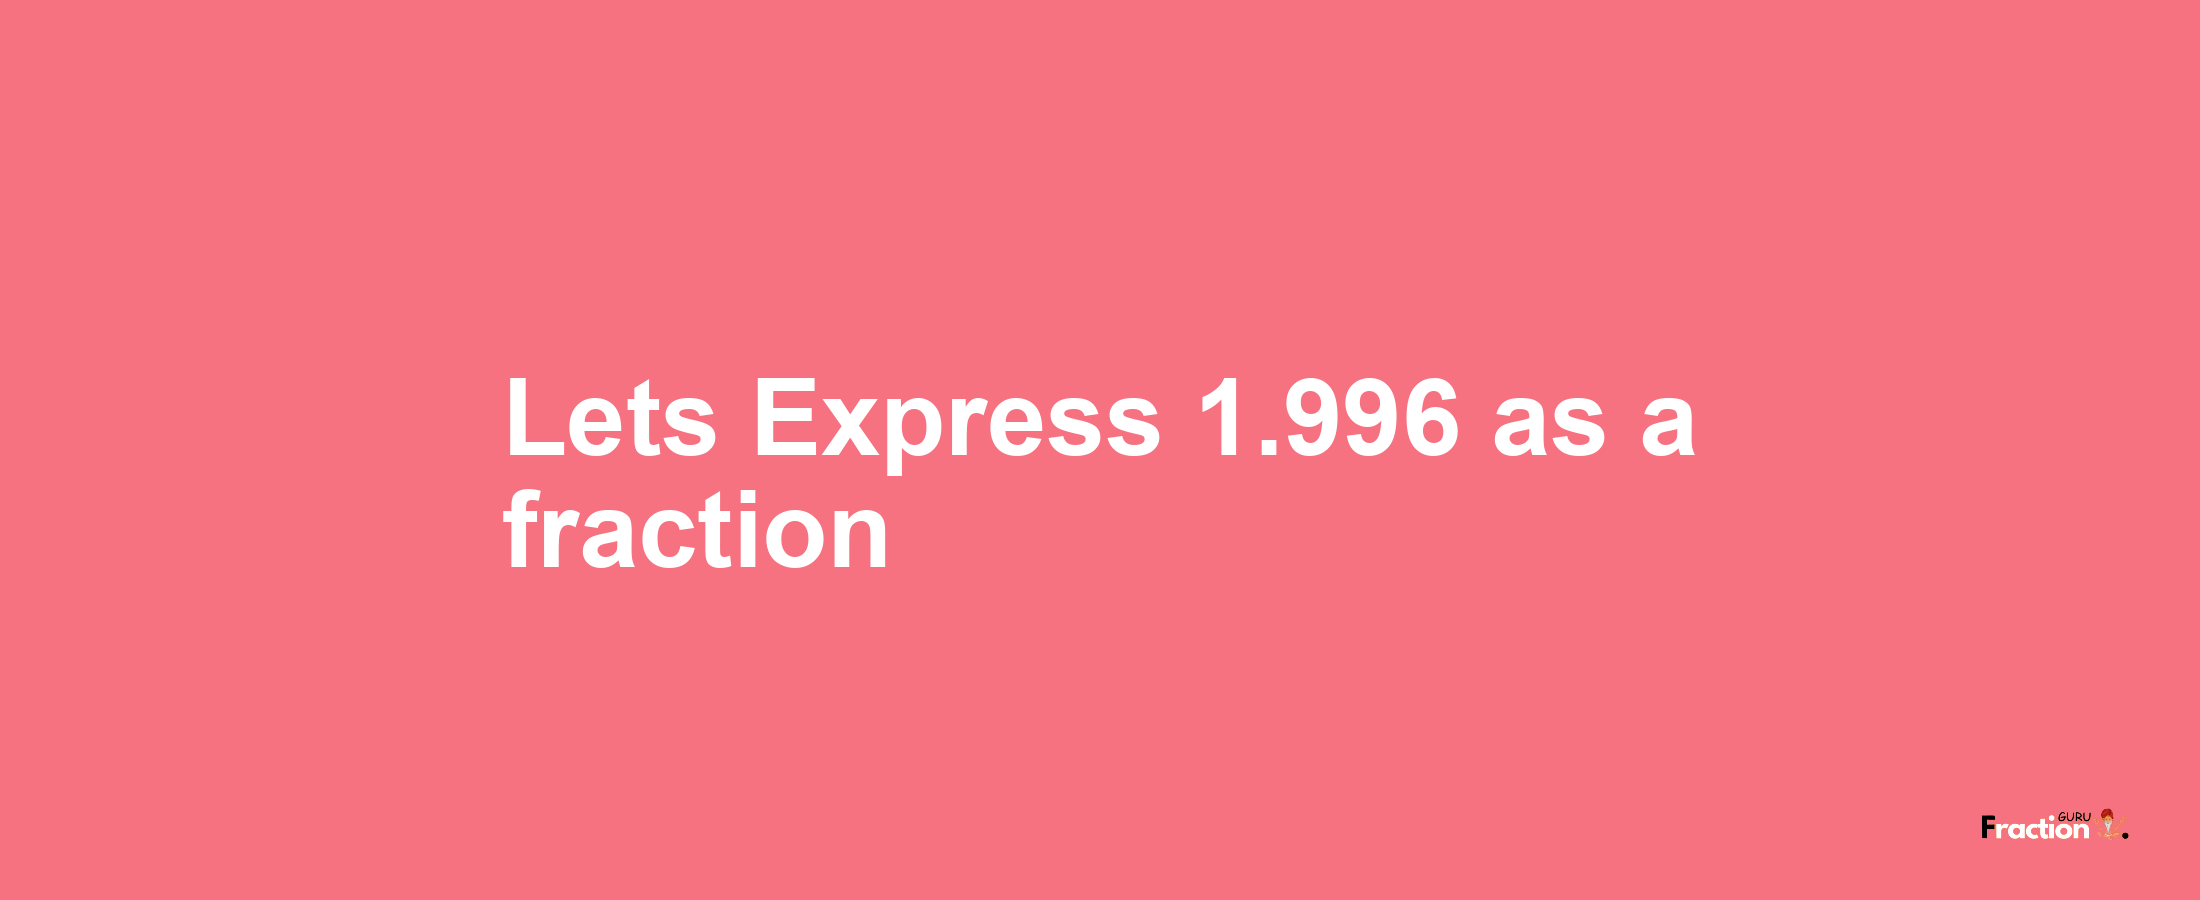 Lets Express 1.996 as afraction